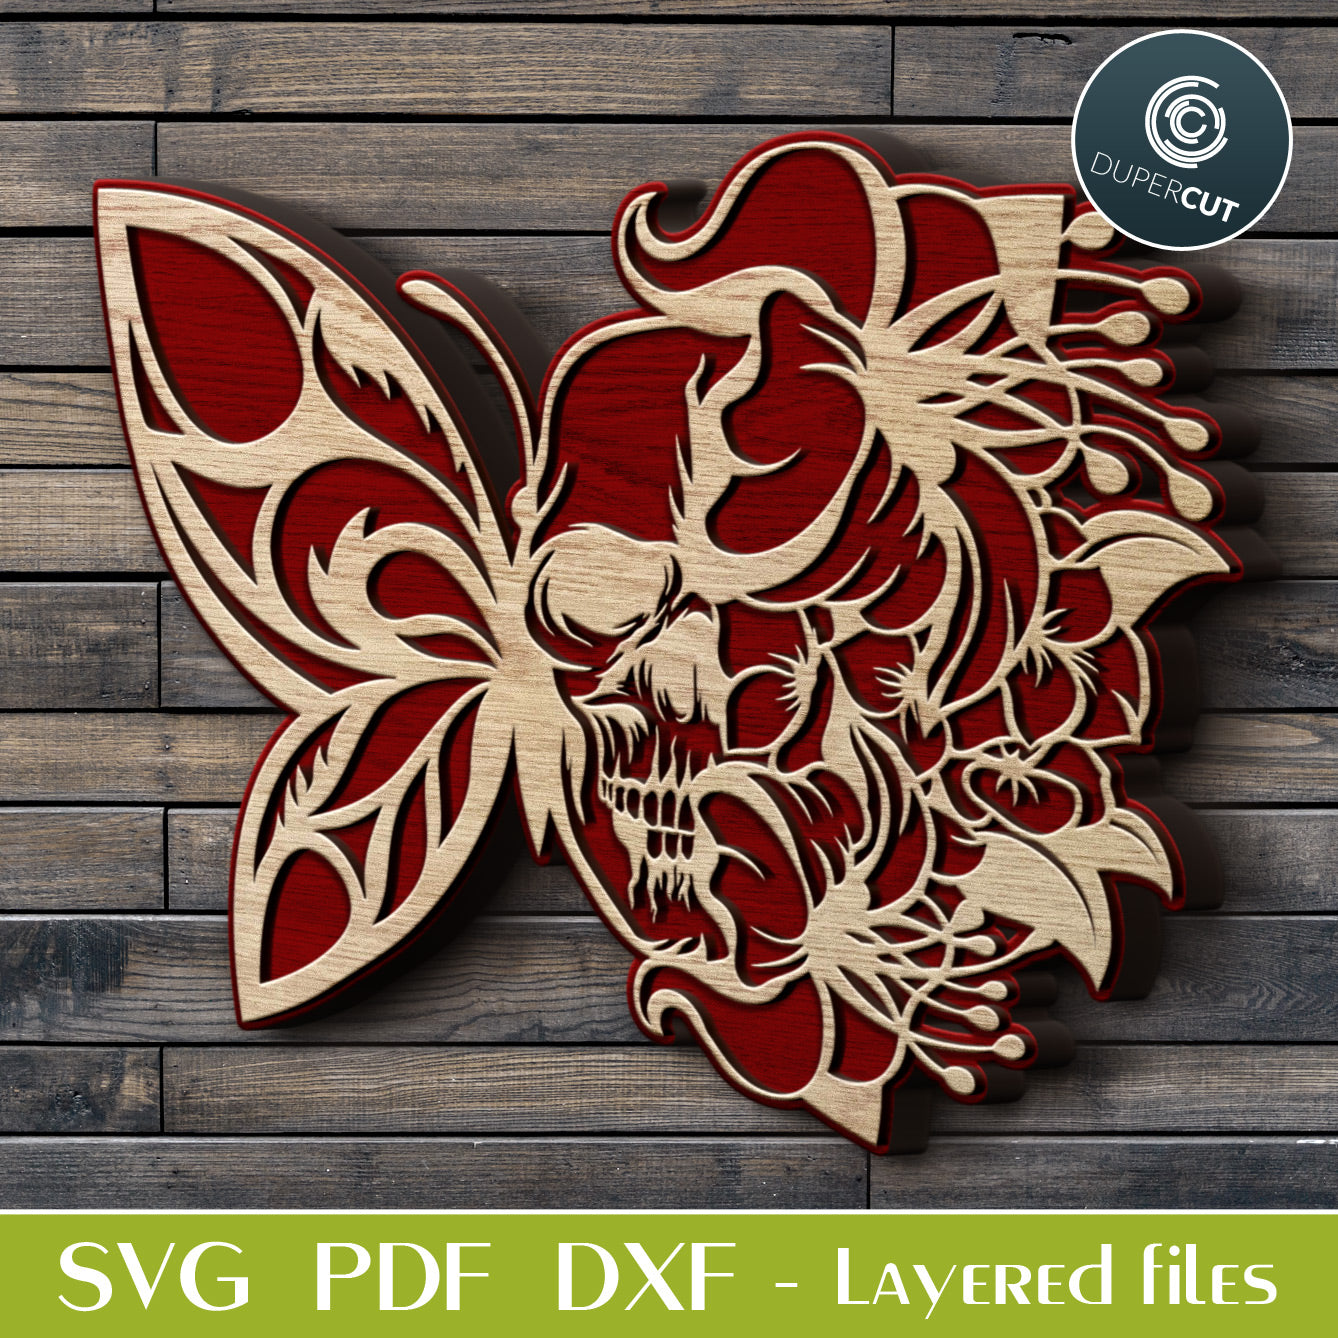 Steampunk floral skull moth - SVG DXF PNG layered cutting files for laser. For use with Glowforge, Cricut, Silhouette, CNC plasma machines